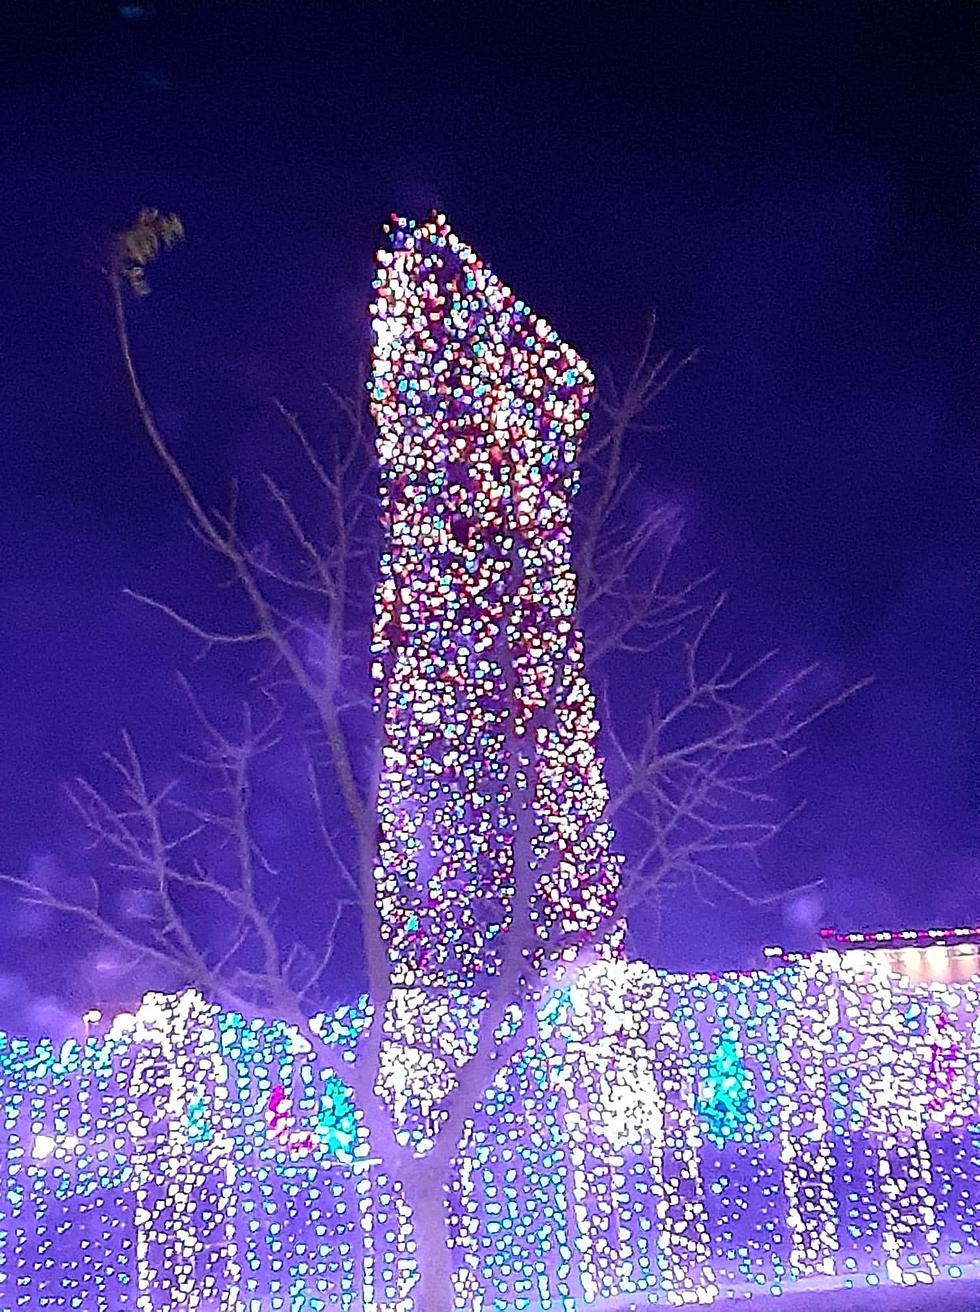 World’s Largest Christmas Tree in Oklahoma Breaks Off Due to High Winds